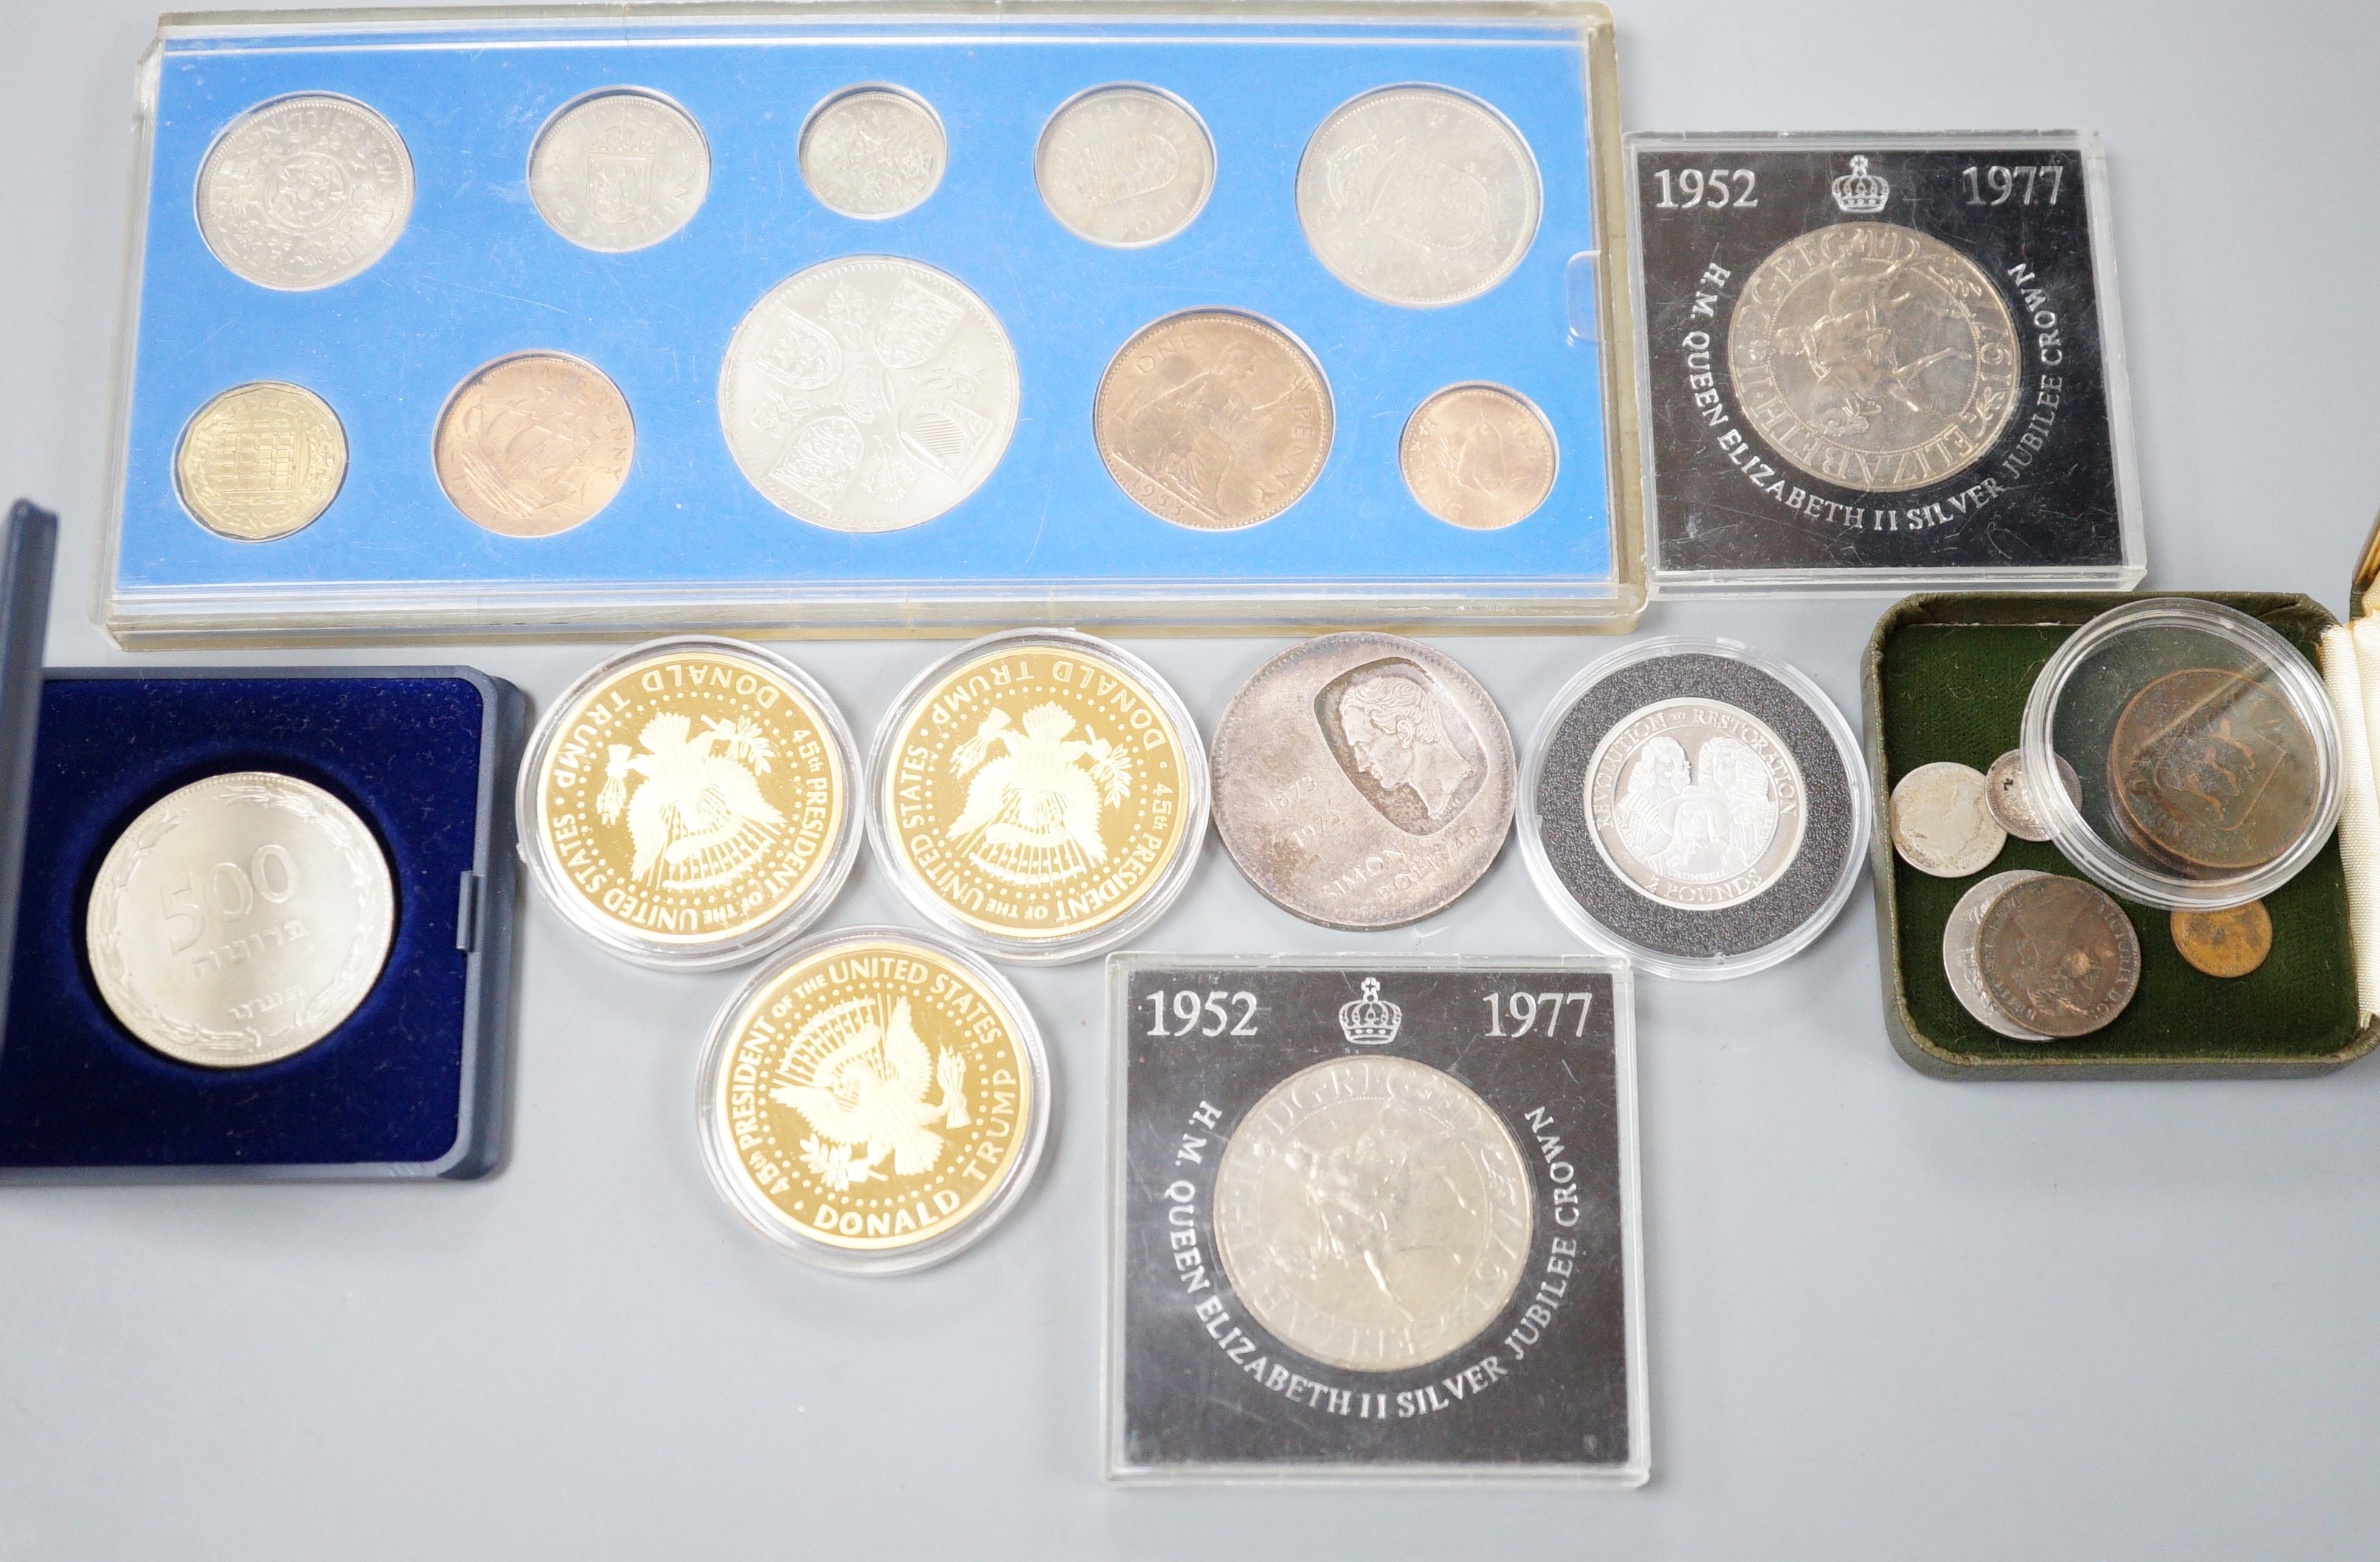 UK Royal Mint and World coins, including a 1799 penny, about UNC, a specimen set of QEII coronation 1953 coins, 2006 and 2010 £2 coins with minting errors, Venezuela 10 bolivares 1973, Donald Trump commemorative coins, a